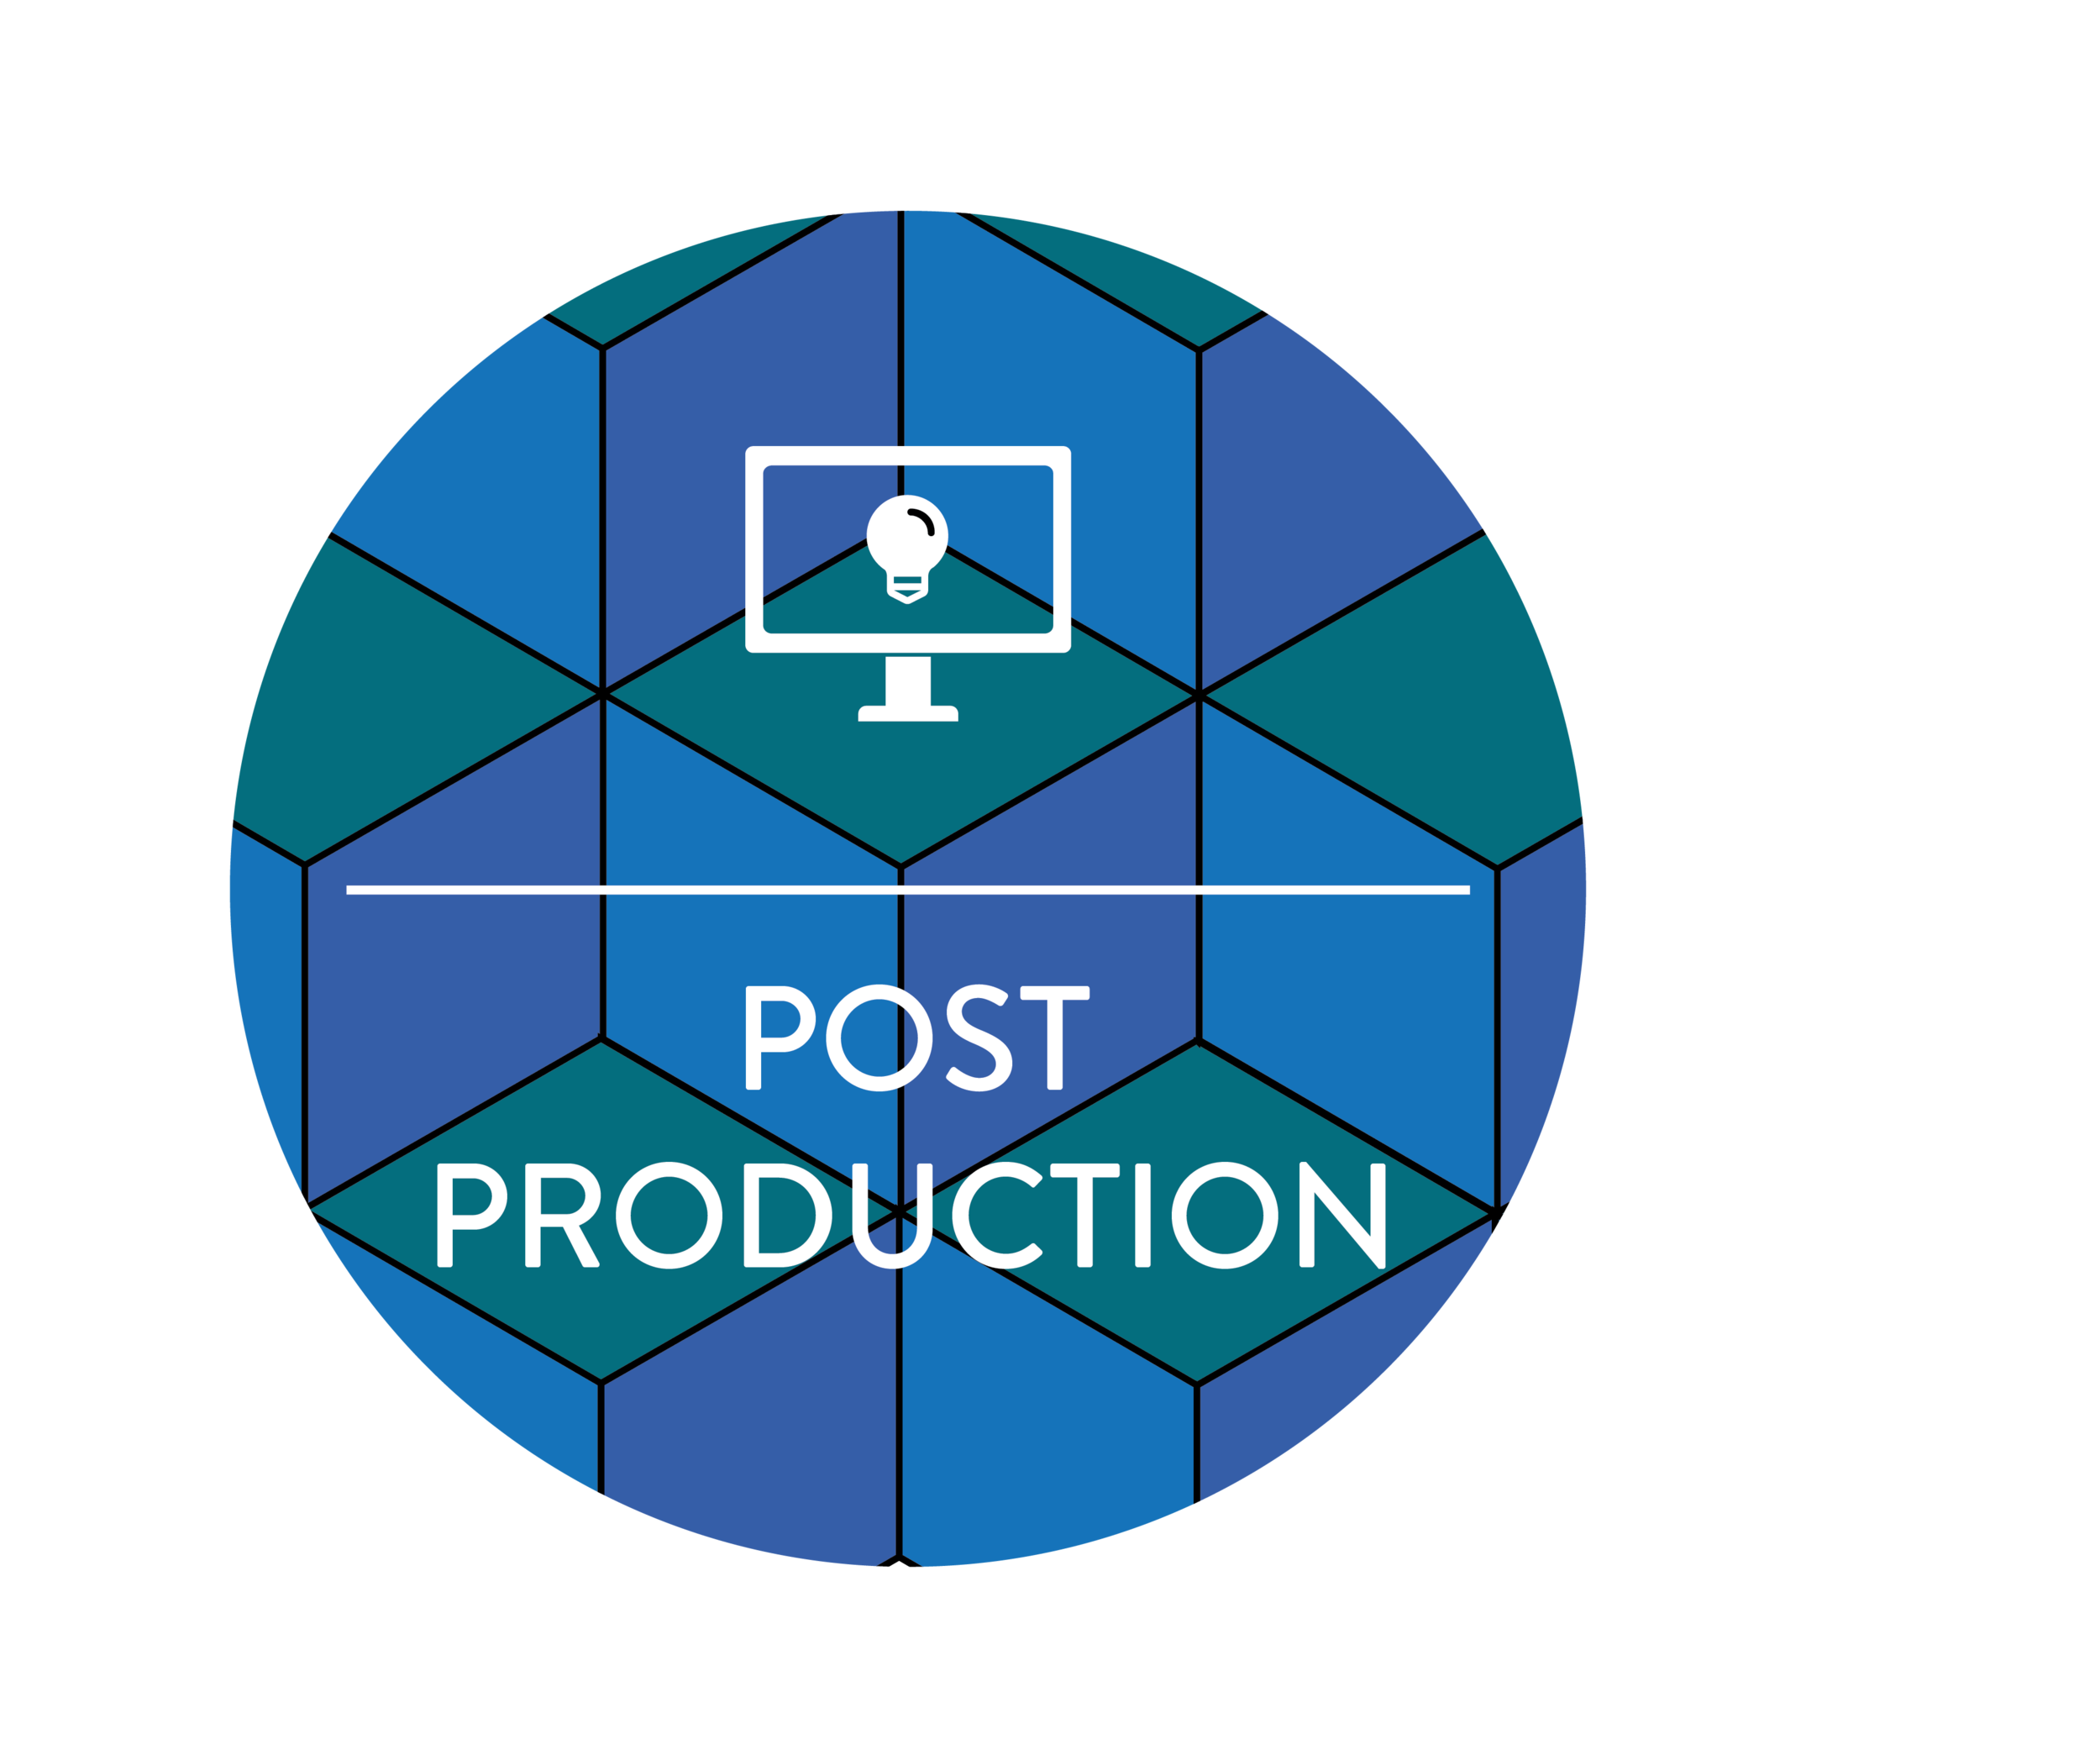   P O S T P R O D U C T I O N  &nbsp; S E R V I C E S  •&nbsp; Post-Production:&nbsp; We set up and support post-production, from assembly editing during the shoot to full-scale picture and sound post.  •&nbsp; Mobile Editing:&nbsp; We can provide mo